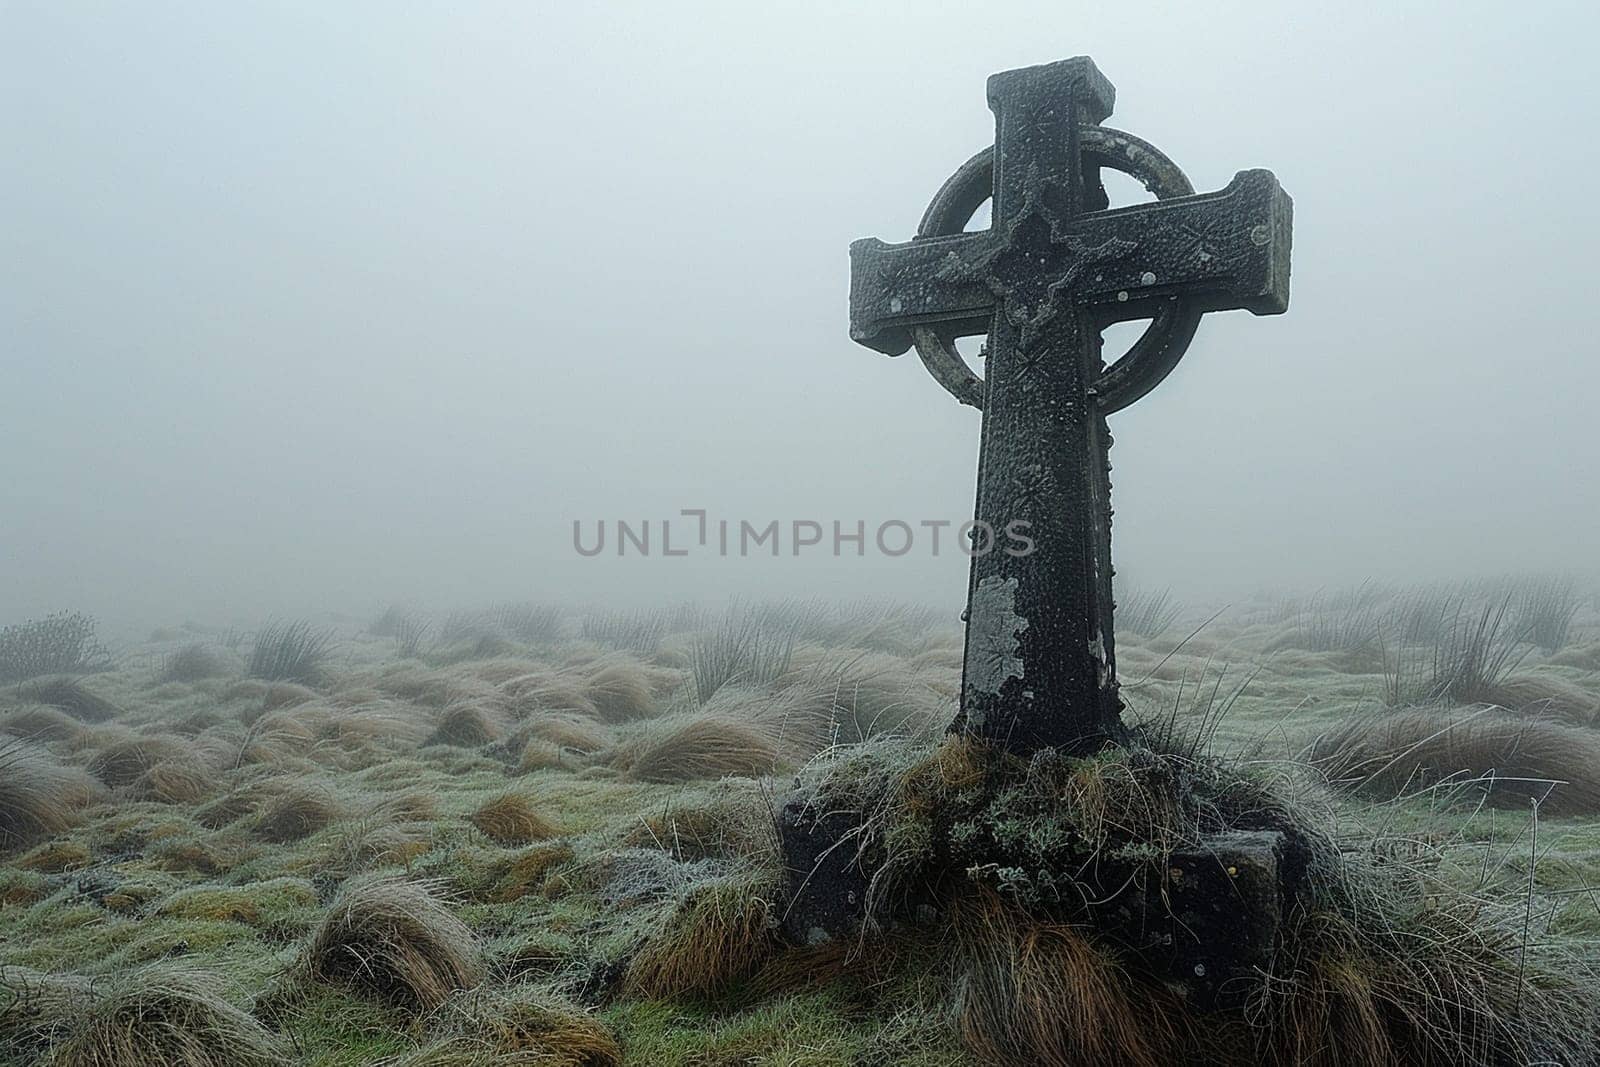 Celtic Cross Standing Solitary in a Misty Field, The cross melds into the morning mist, symbolizing faith and Celtic heritage.